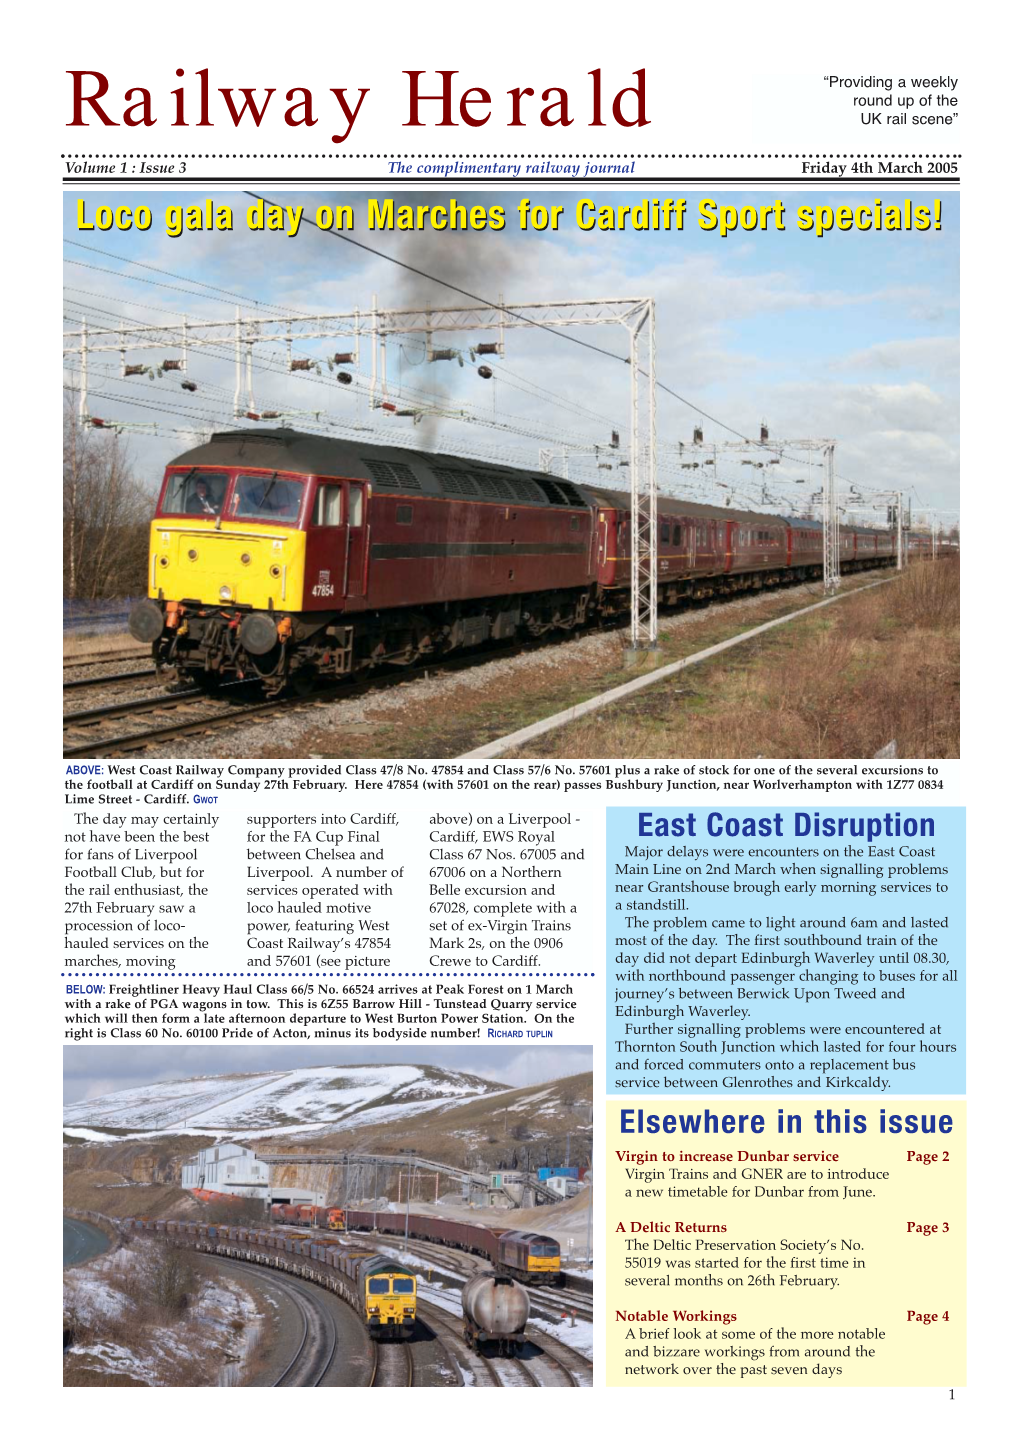 Issue 3 the Complimentary Railway Journal Friday 4Th March 2005 Loco Gala Day on Marches for Cardiff Sport Specials!